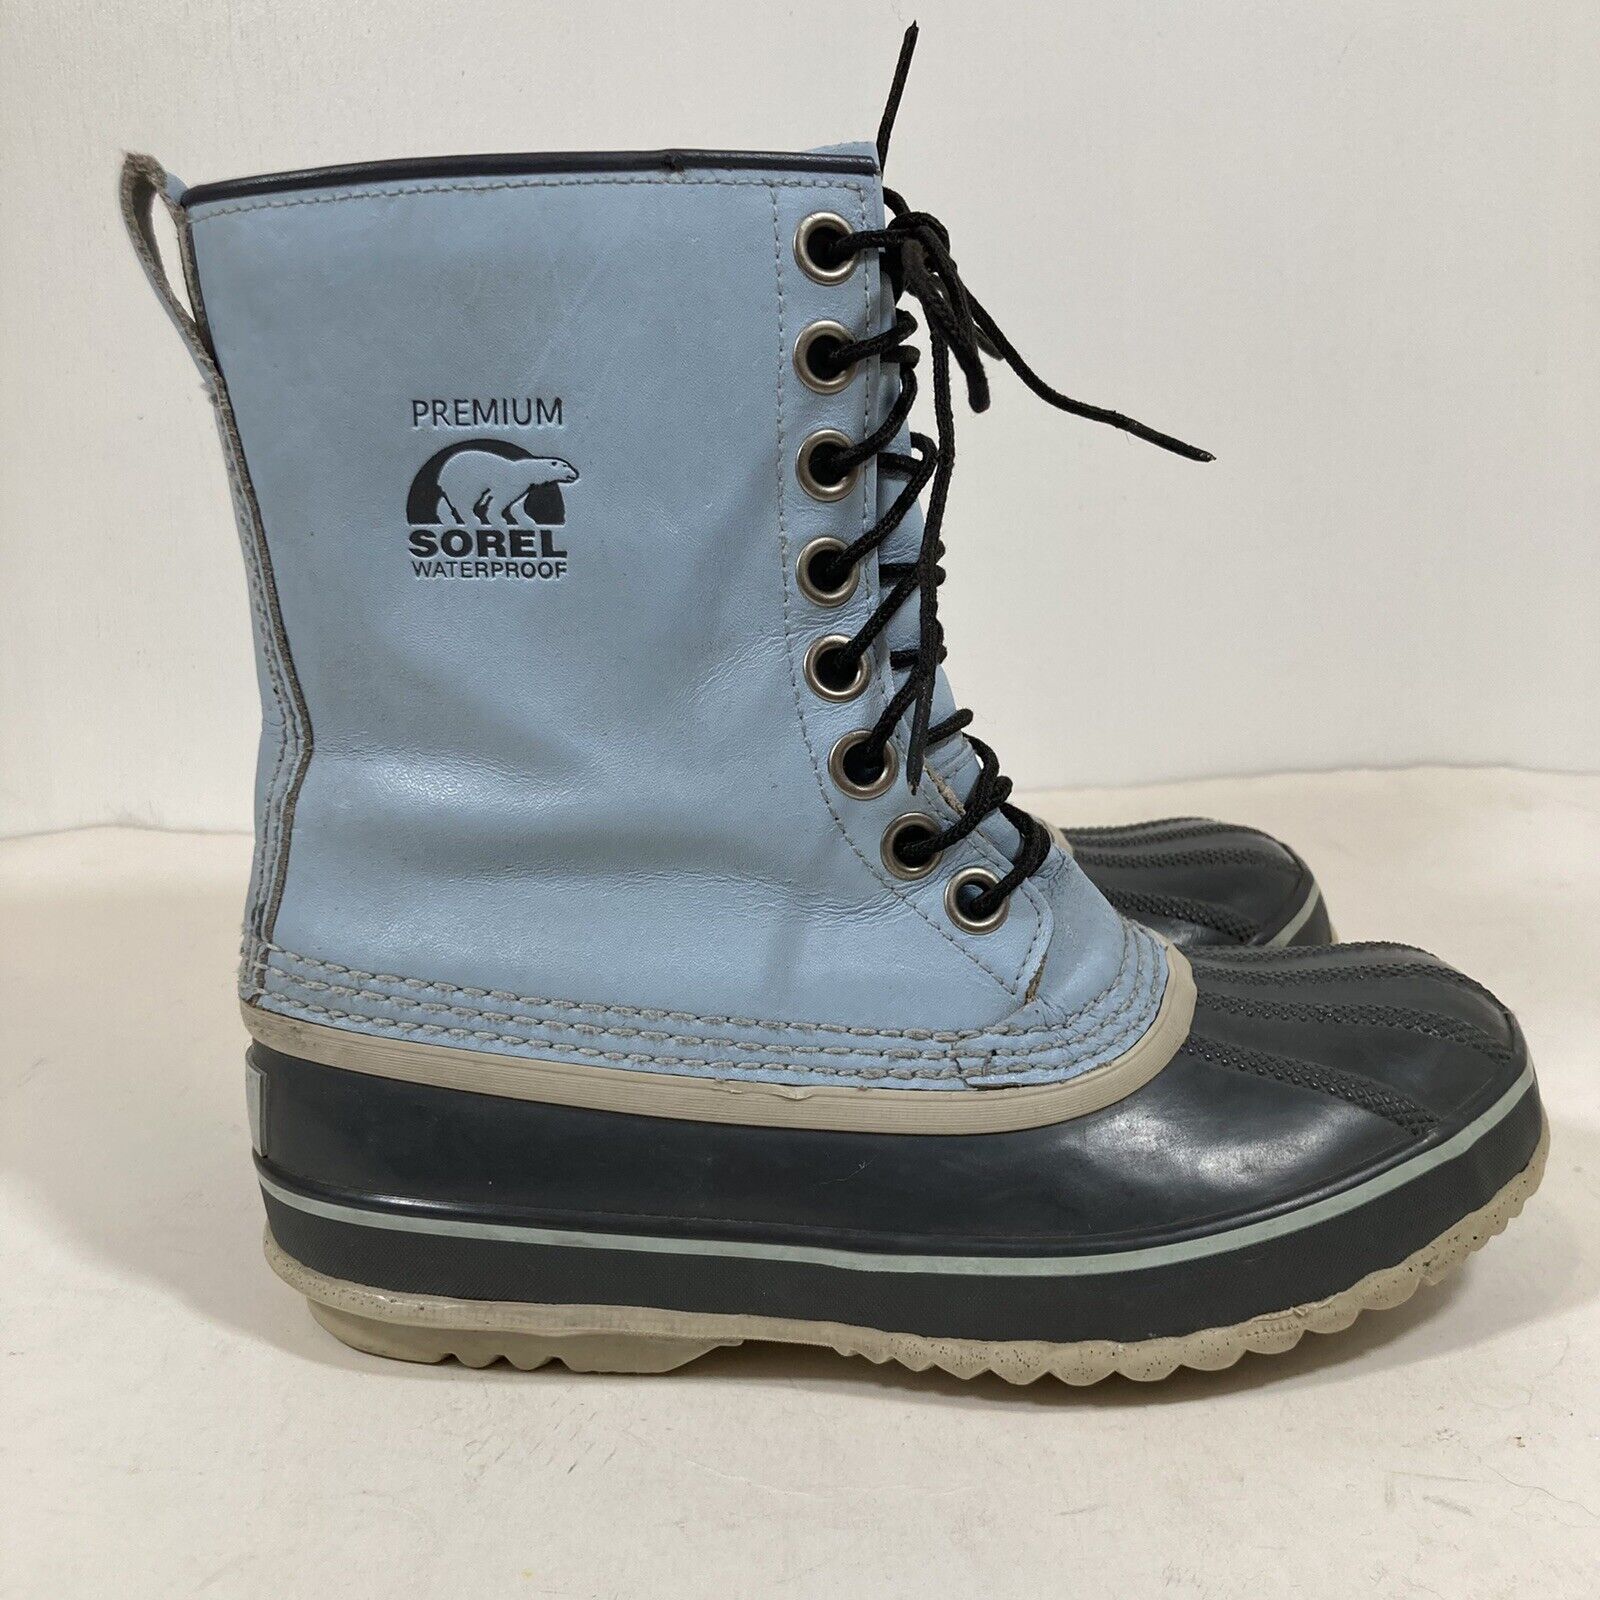 Sorel Women's 1964 Premium Leather Winter Boots Size 6 Light Blue With Liners